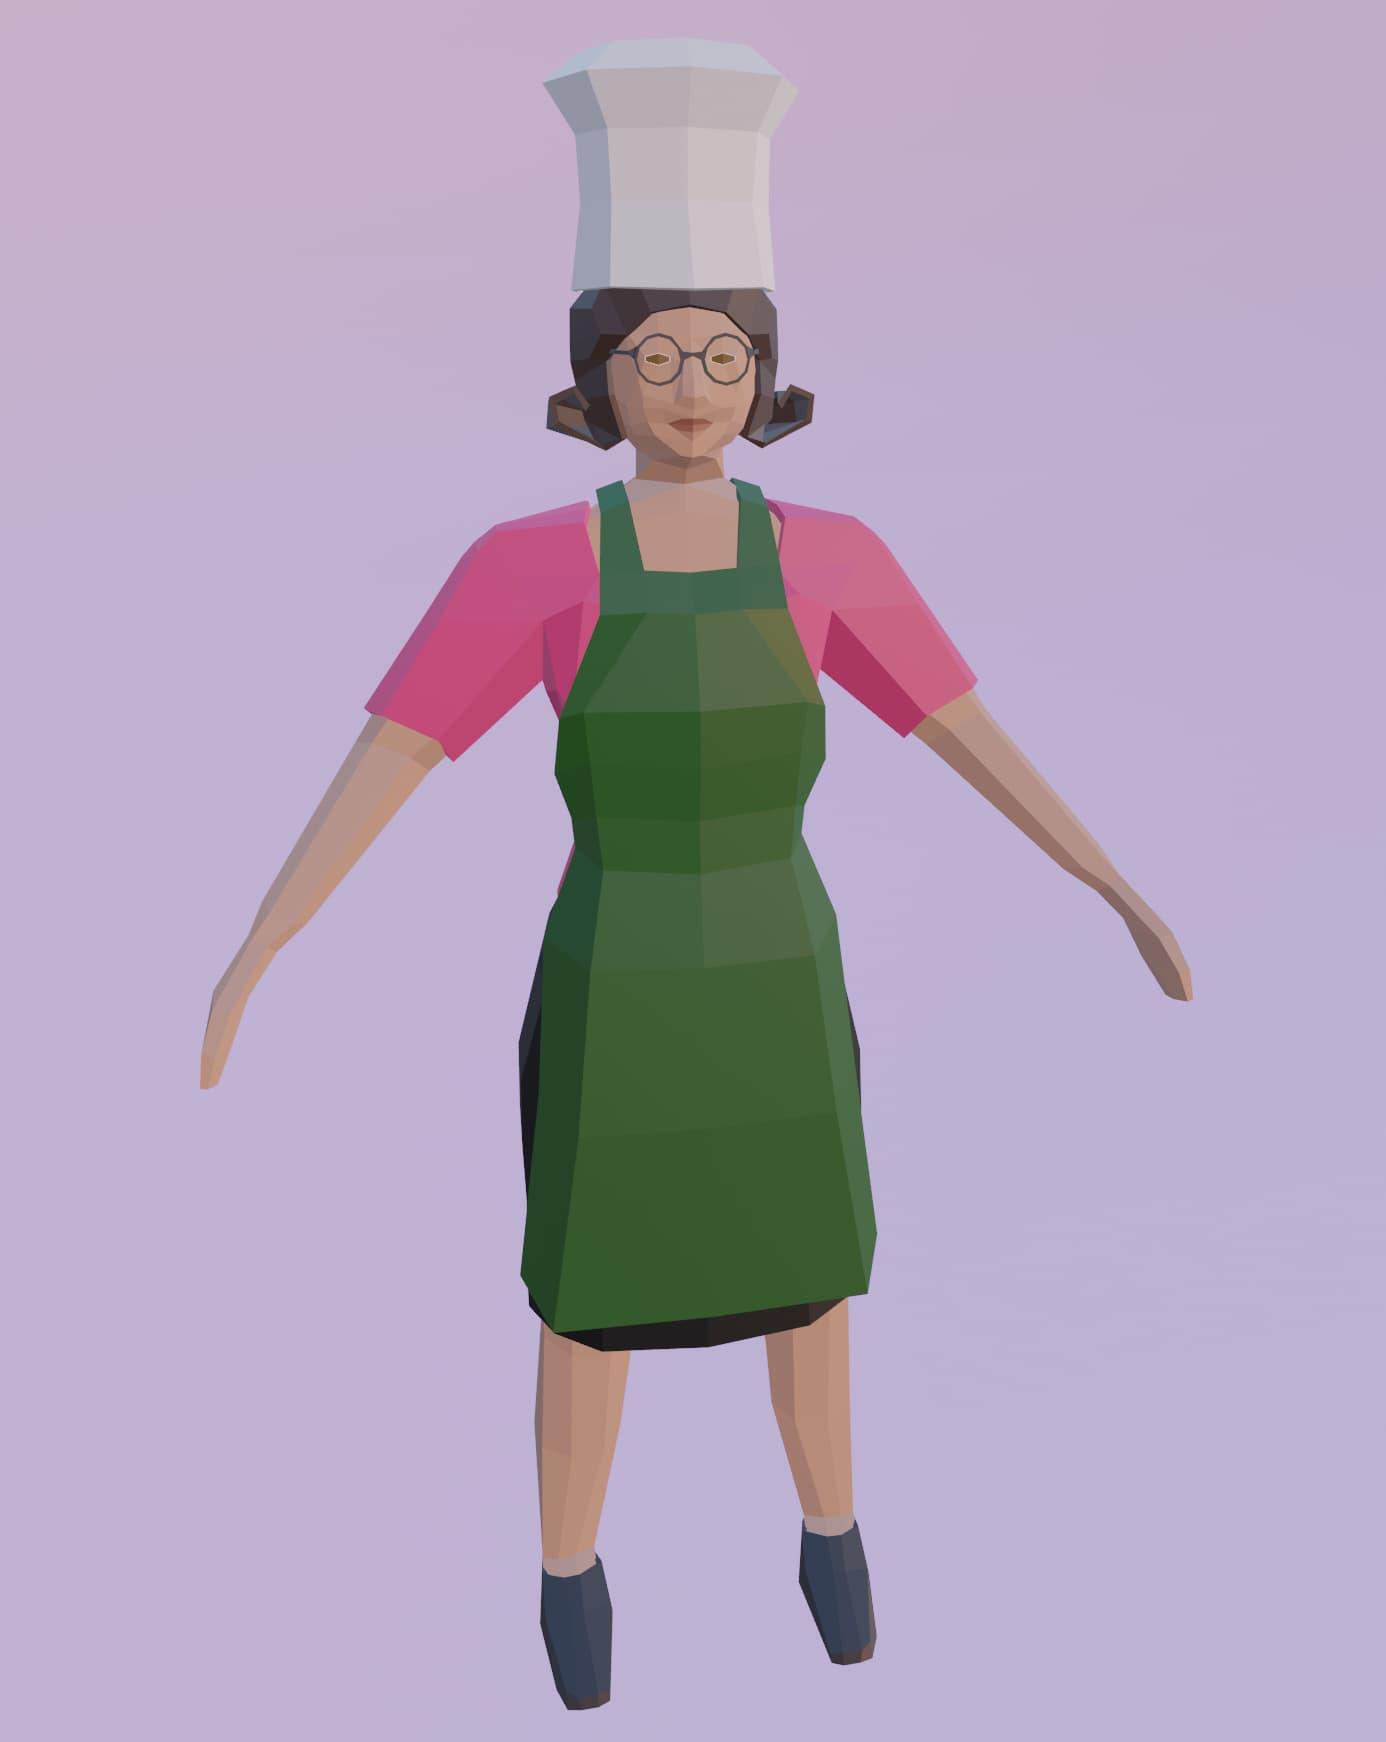 A low-poly 3D model of a tan-skinned woman with curly black hair, wearing a chef hat, round glasses, a pink top, a black skirt, a green apron, and dress shoes 